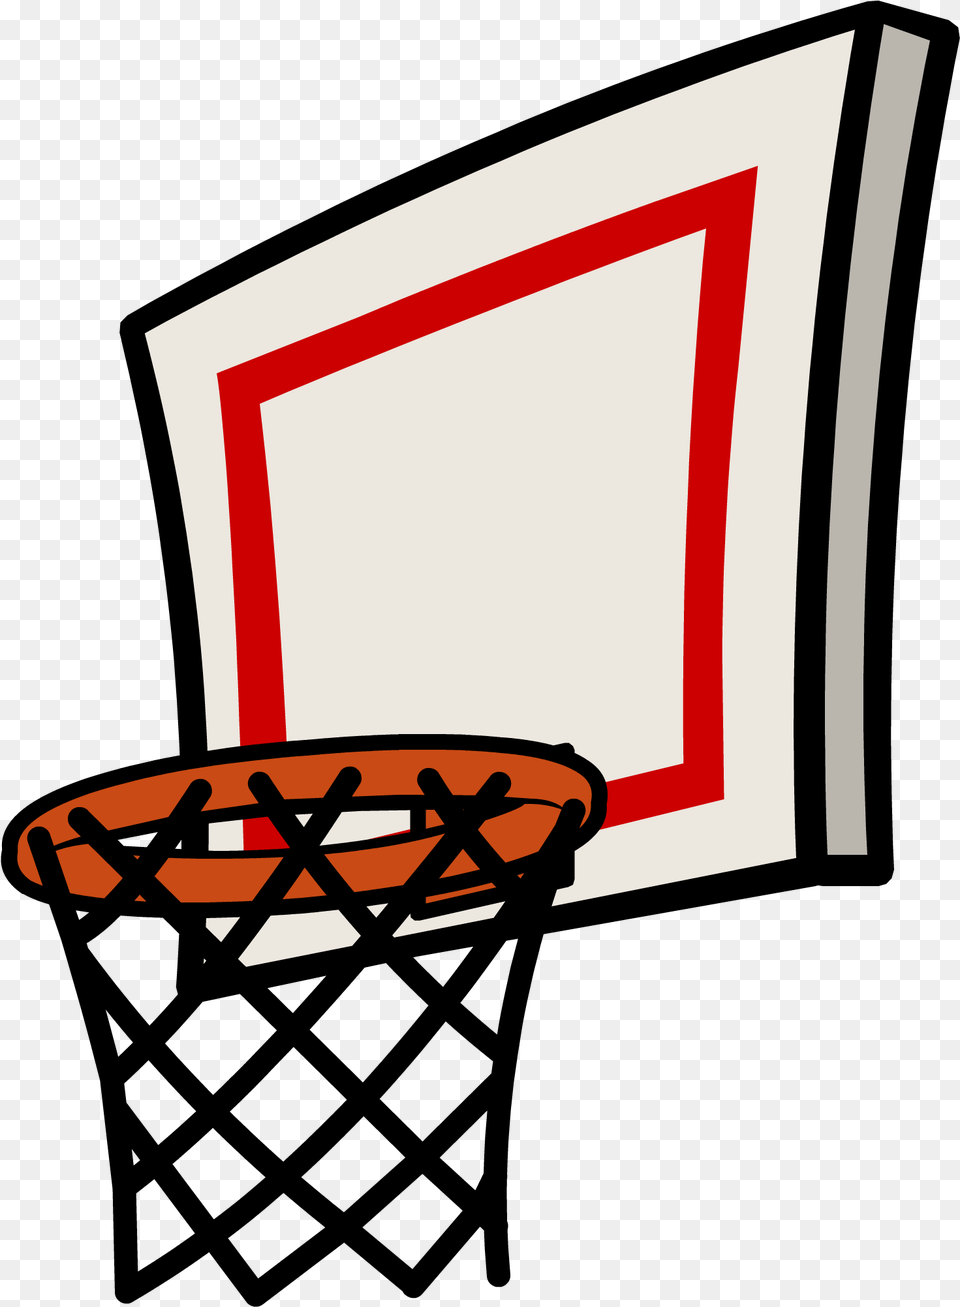 Net Clipart Basketball Swish Background Basketball Hoop Clipart Free Transparent Png